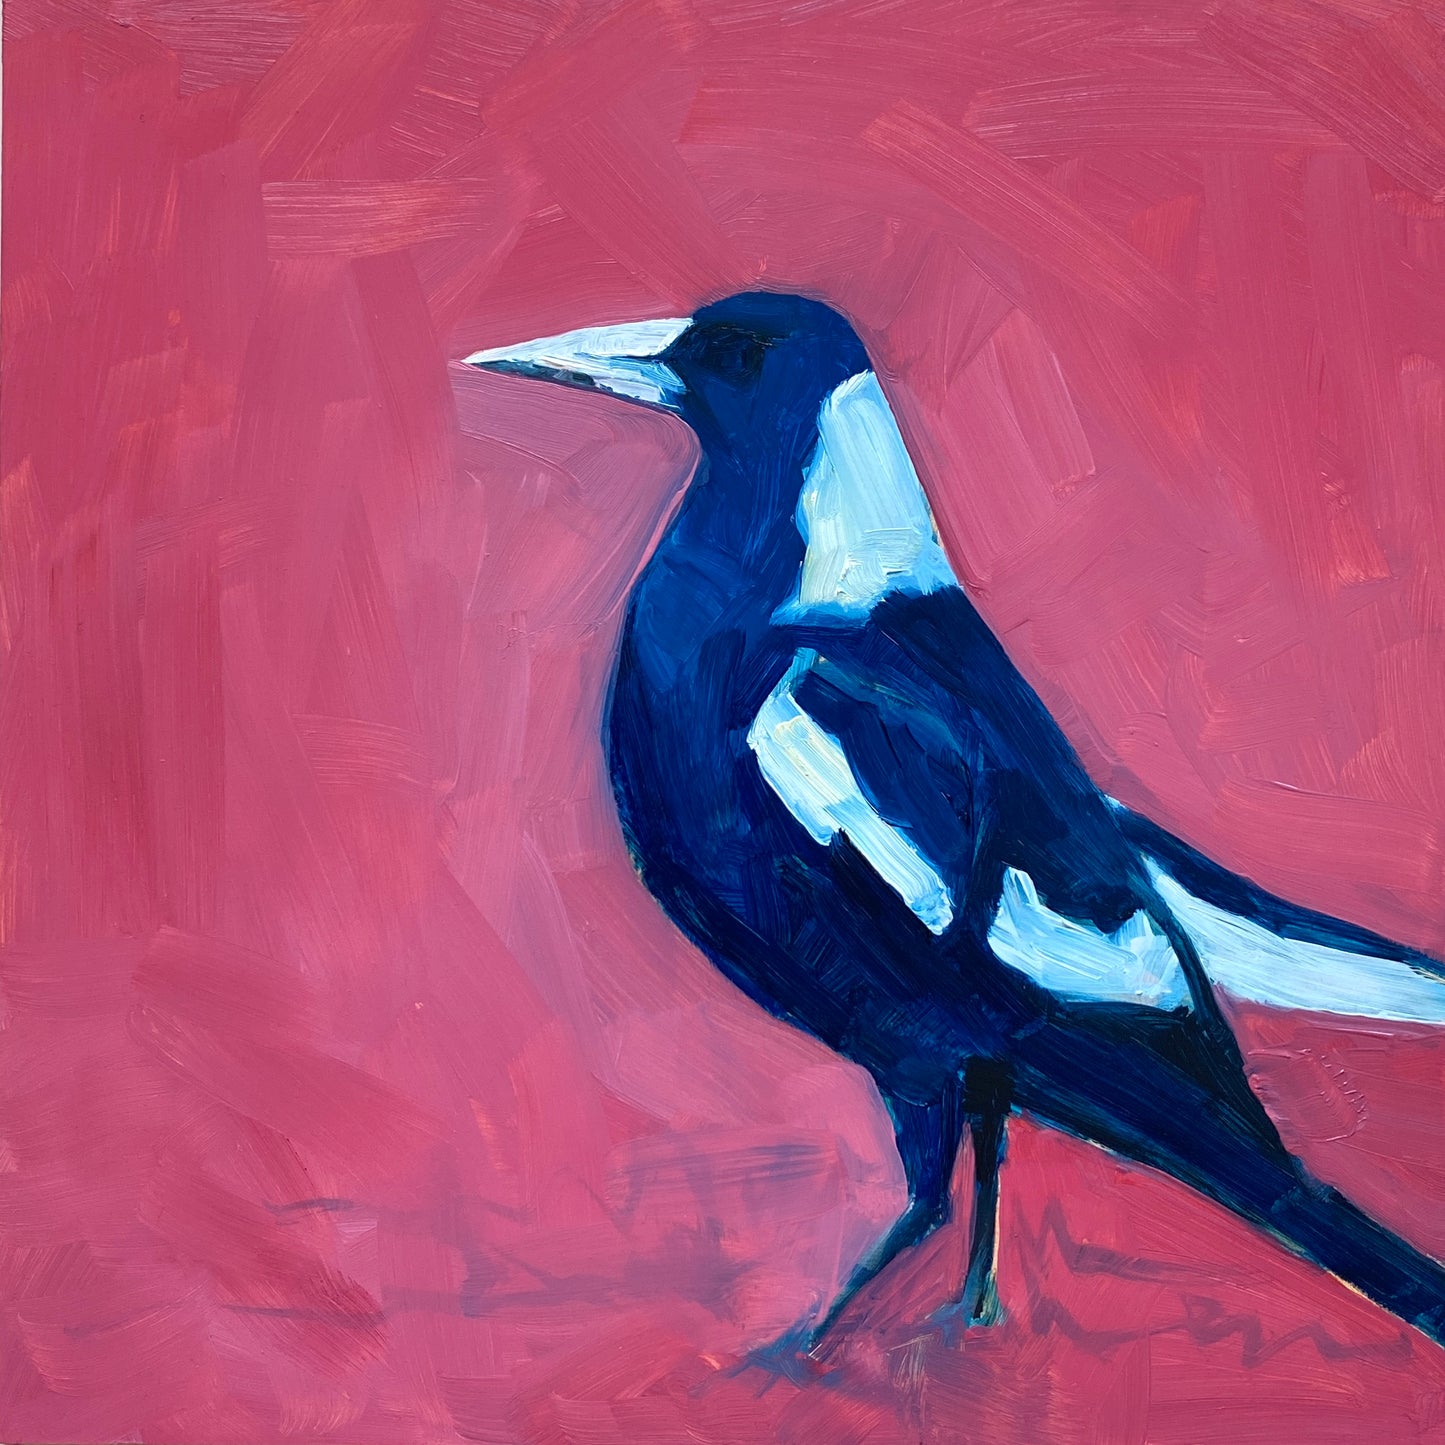 oil painting on panel of a magpie in navy blue and white on a bright pink background